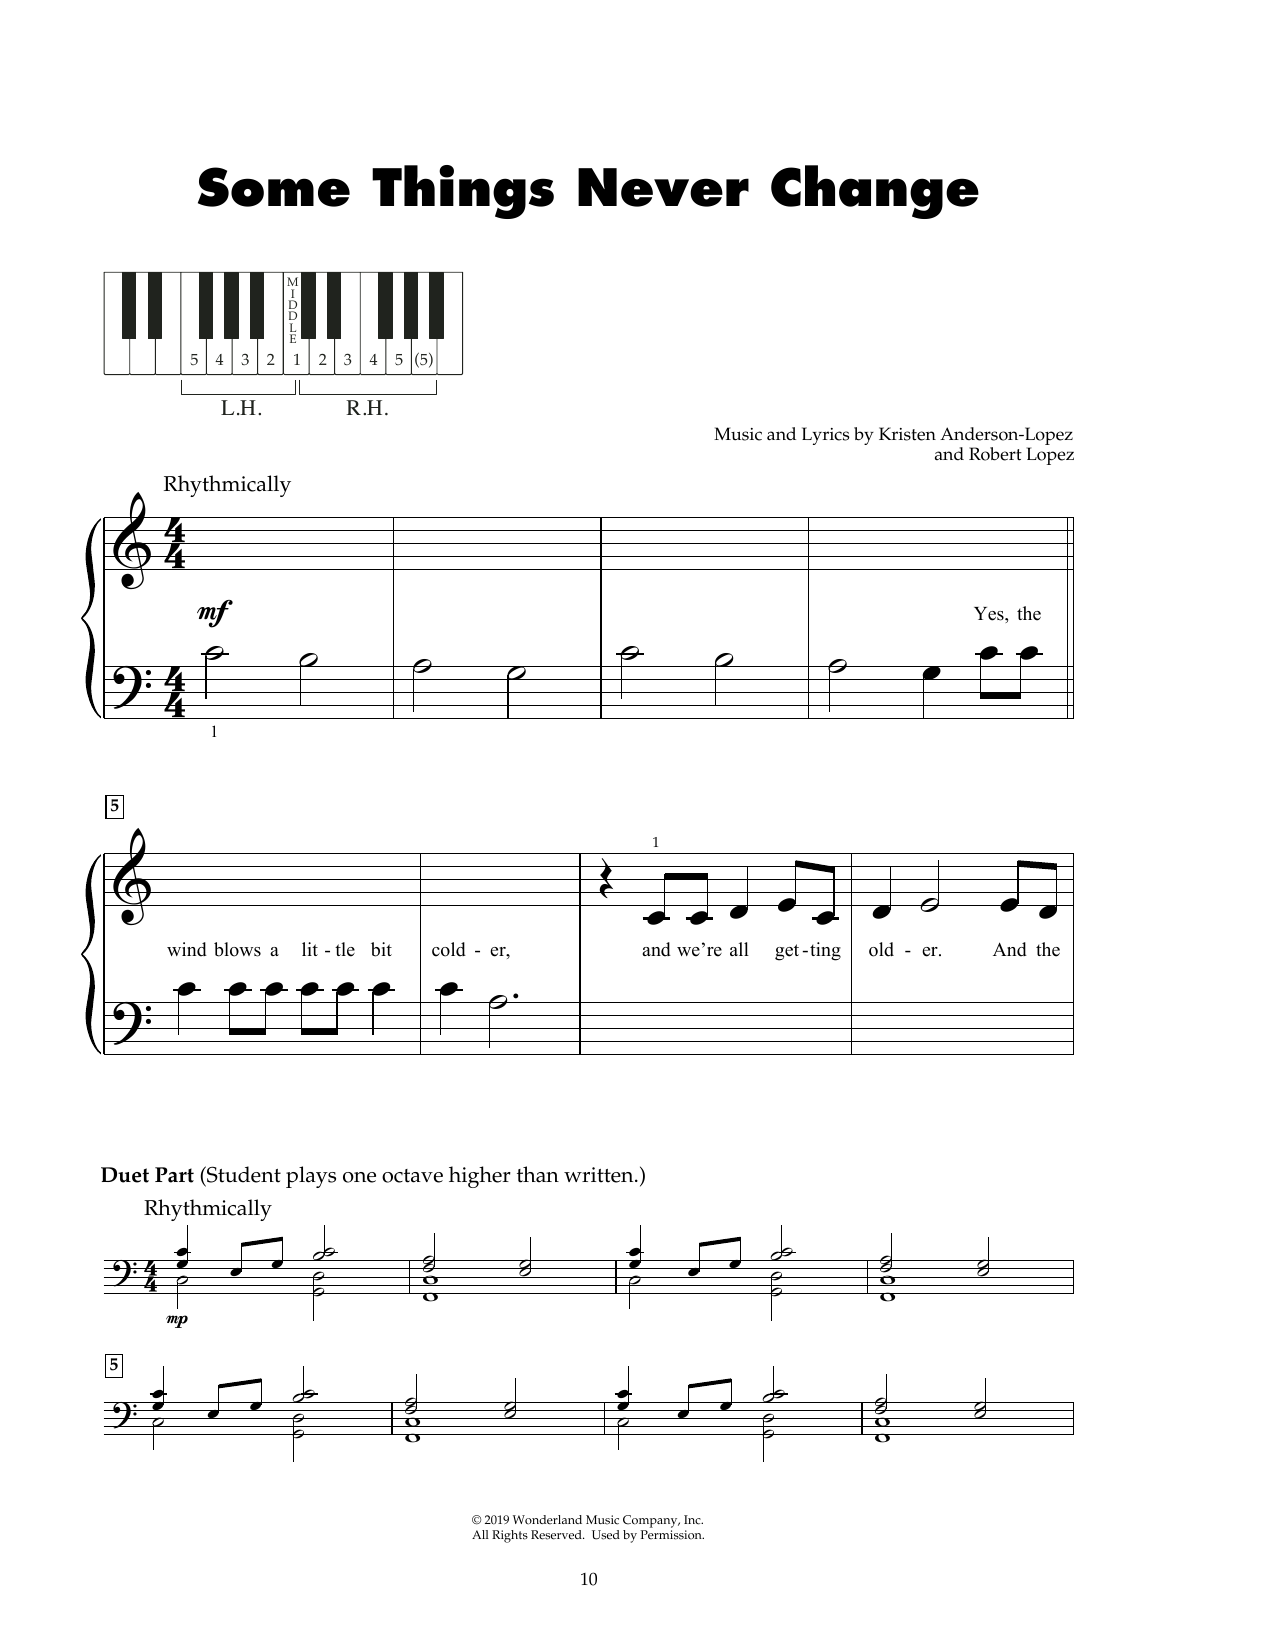 Download Kristen Bell, Idina Menzel and Cast Some Things Never Change (from Disney's Sheet Music